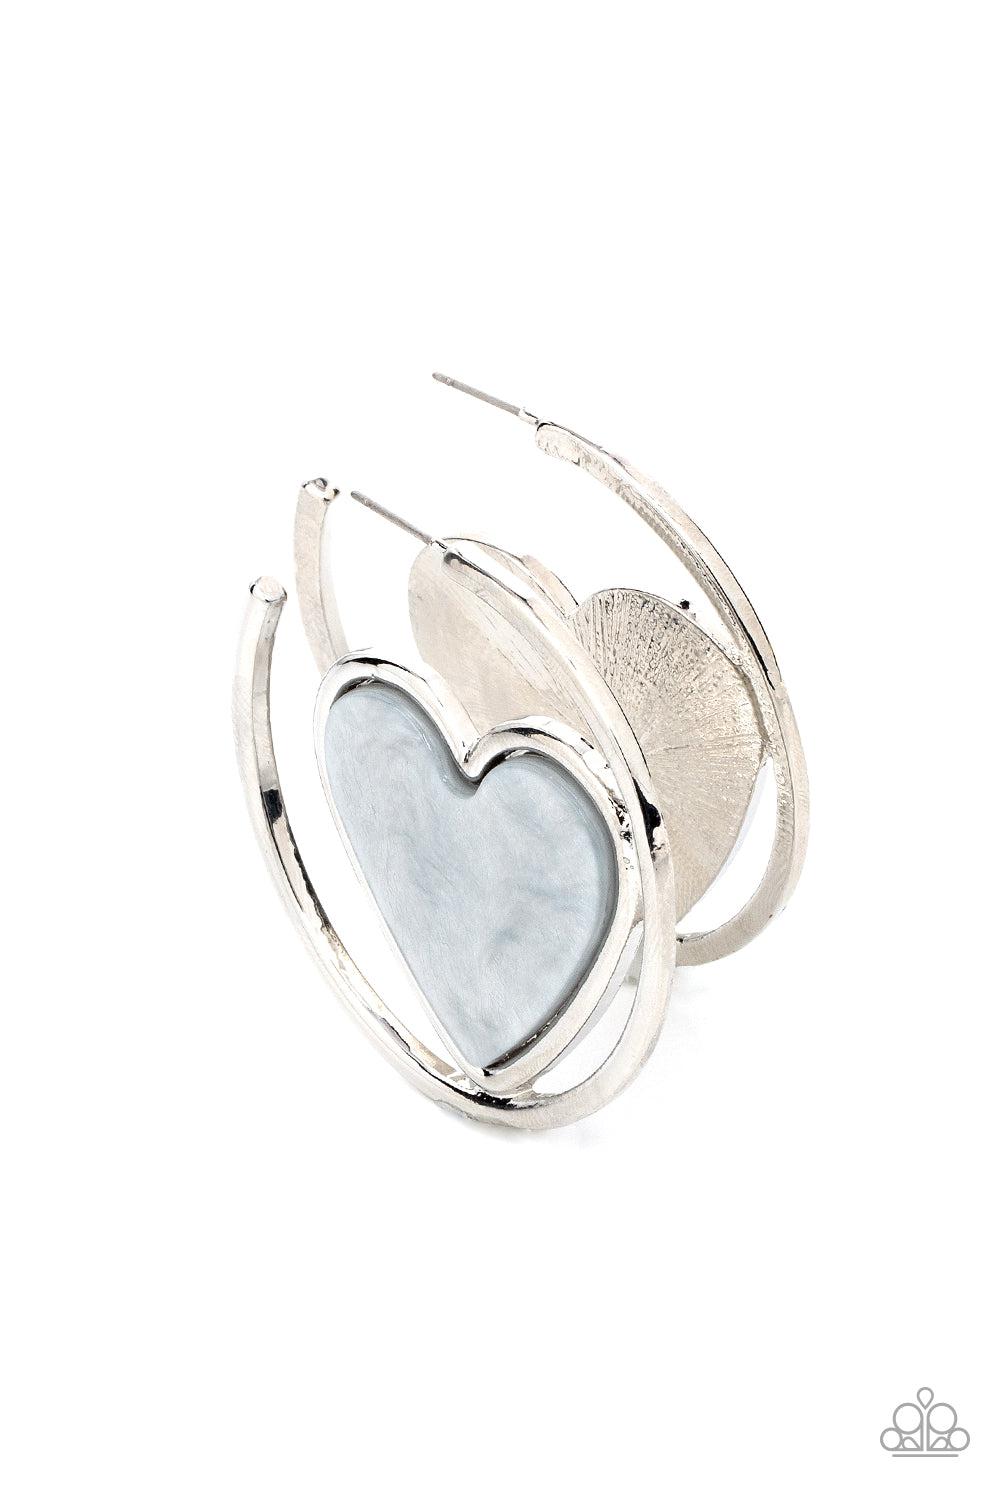 Smitten with You Silver Heart Hoop Earrings - Paparazzi Accessories- lightbox - CarasShop.com - $5 Jewelry by Cara Jewels